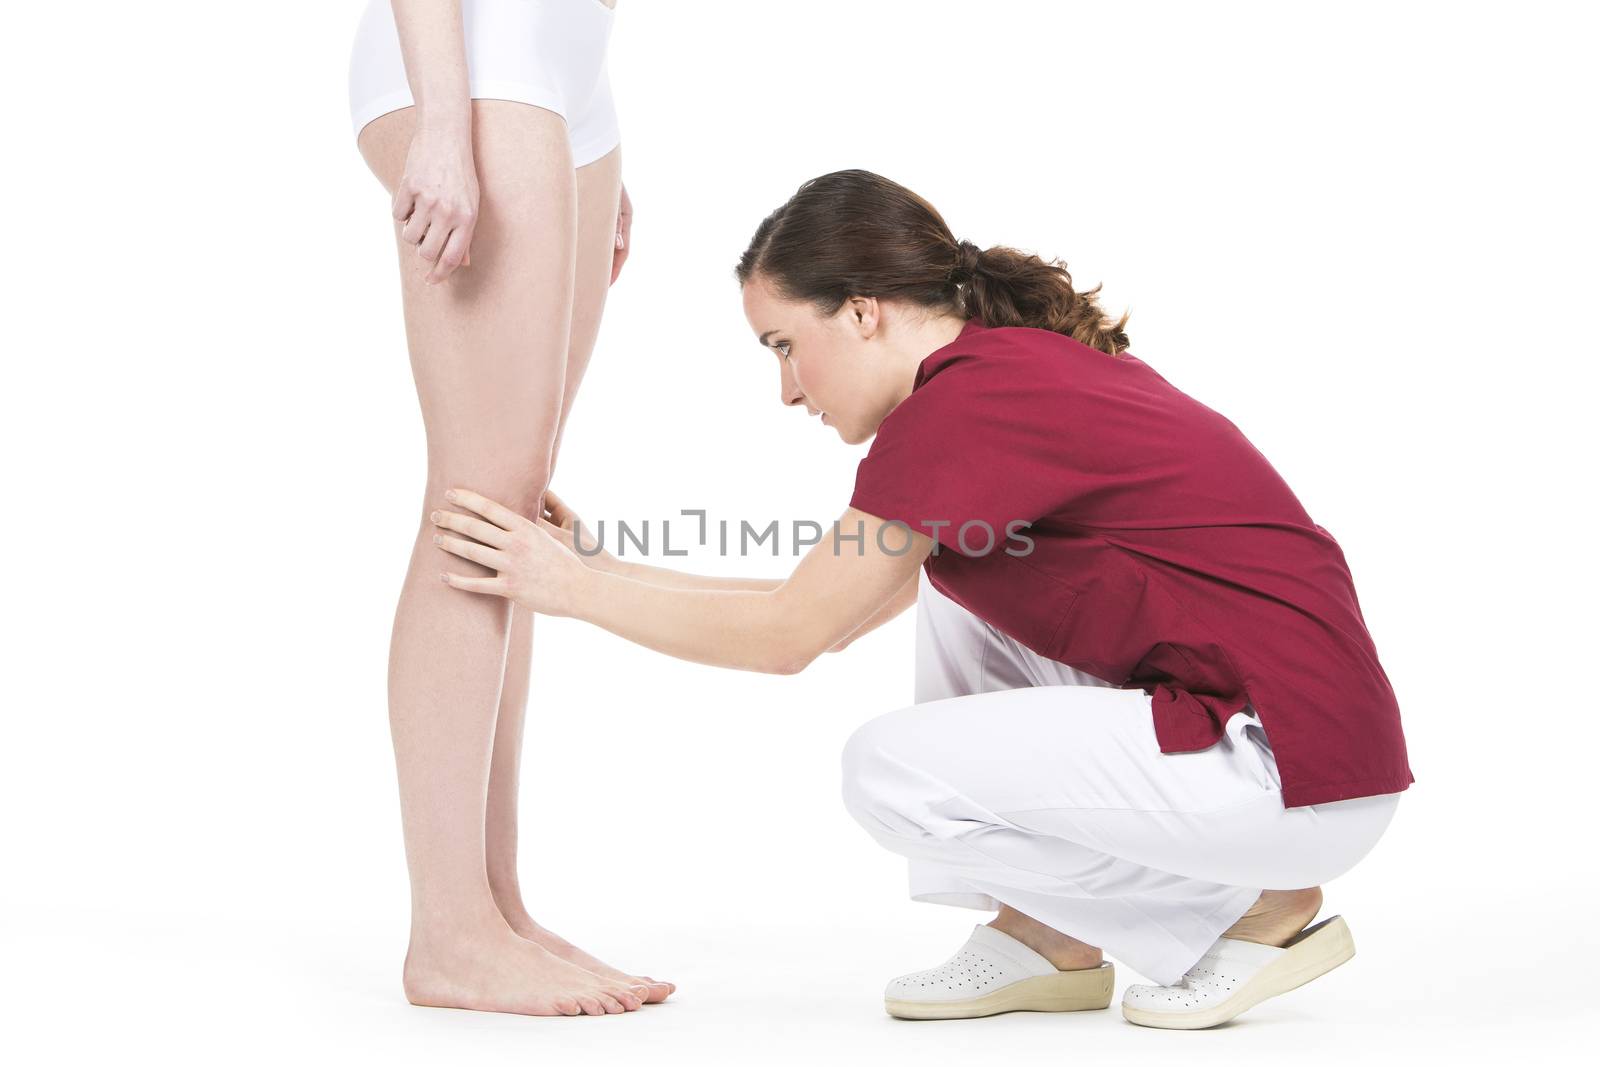 Physiotherapist doing a knee evaluation by Flareimage